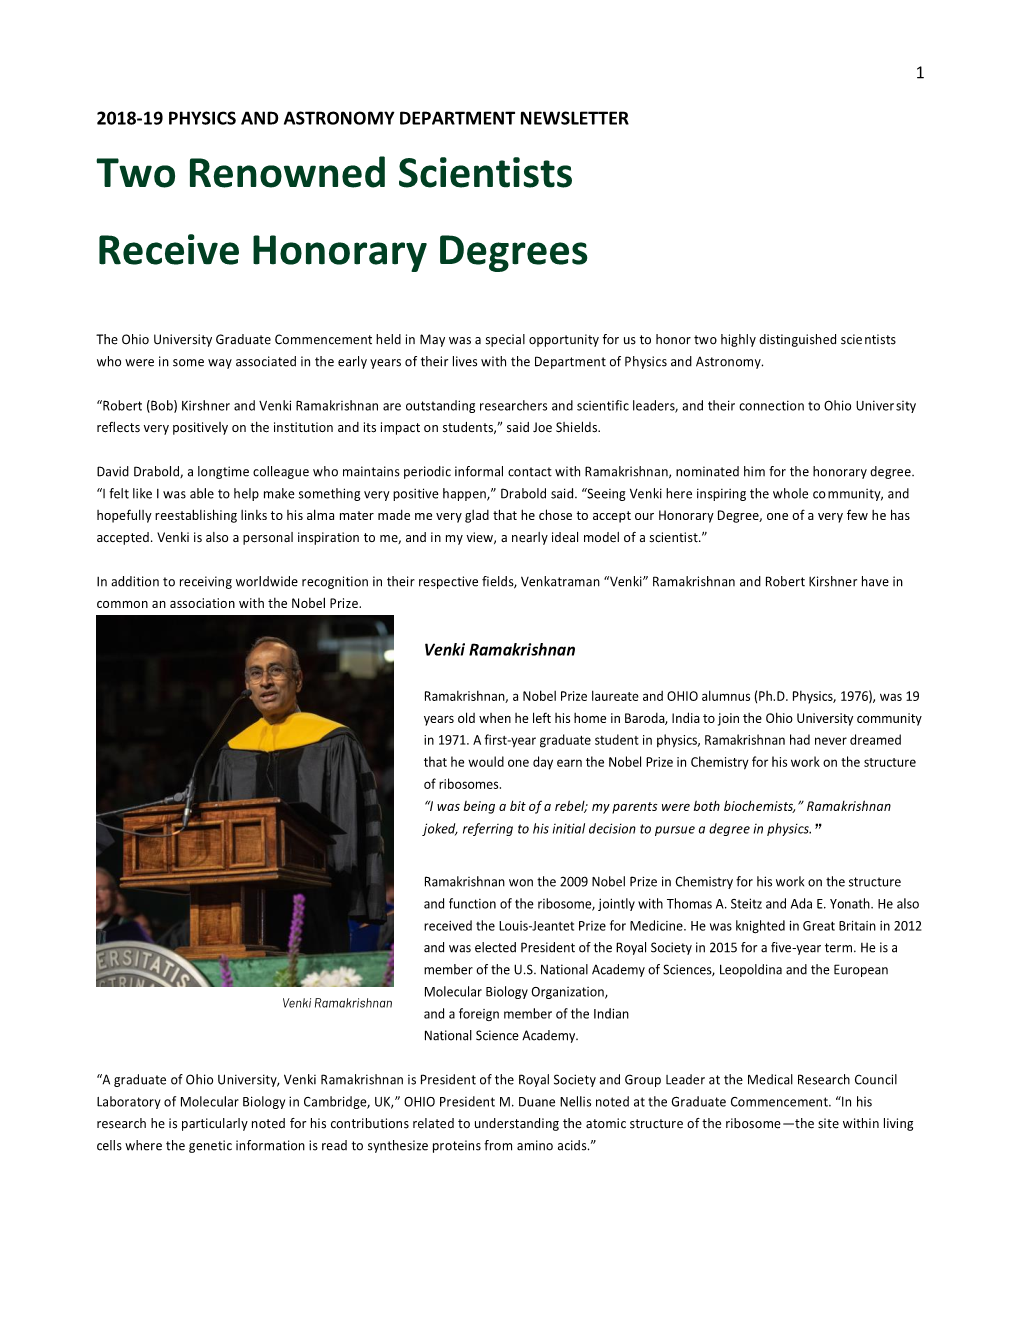 2018-19 PHYSICS and ASTRONOMY DEPARTMENT NEWSLETTER Two Renowned Scientists Receive Honorary Degrees